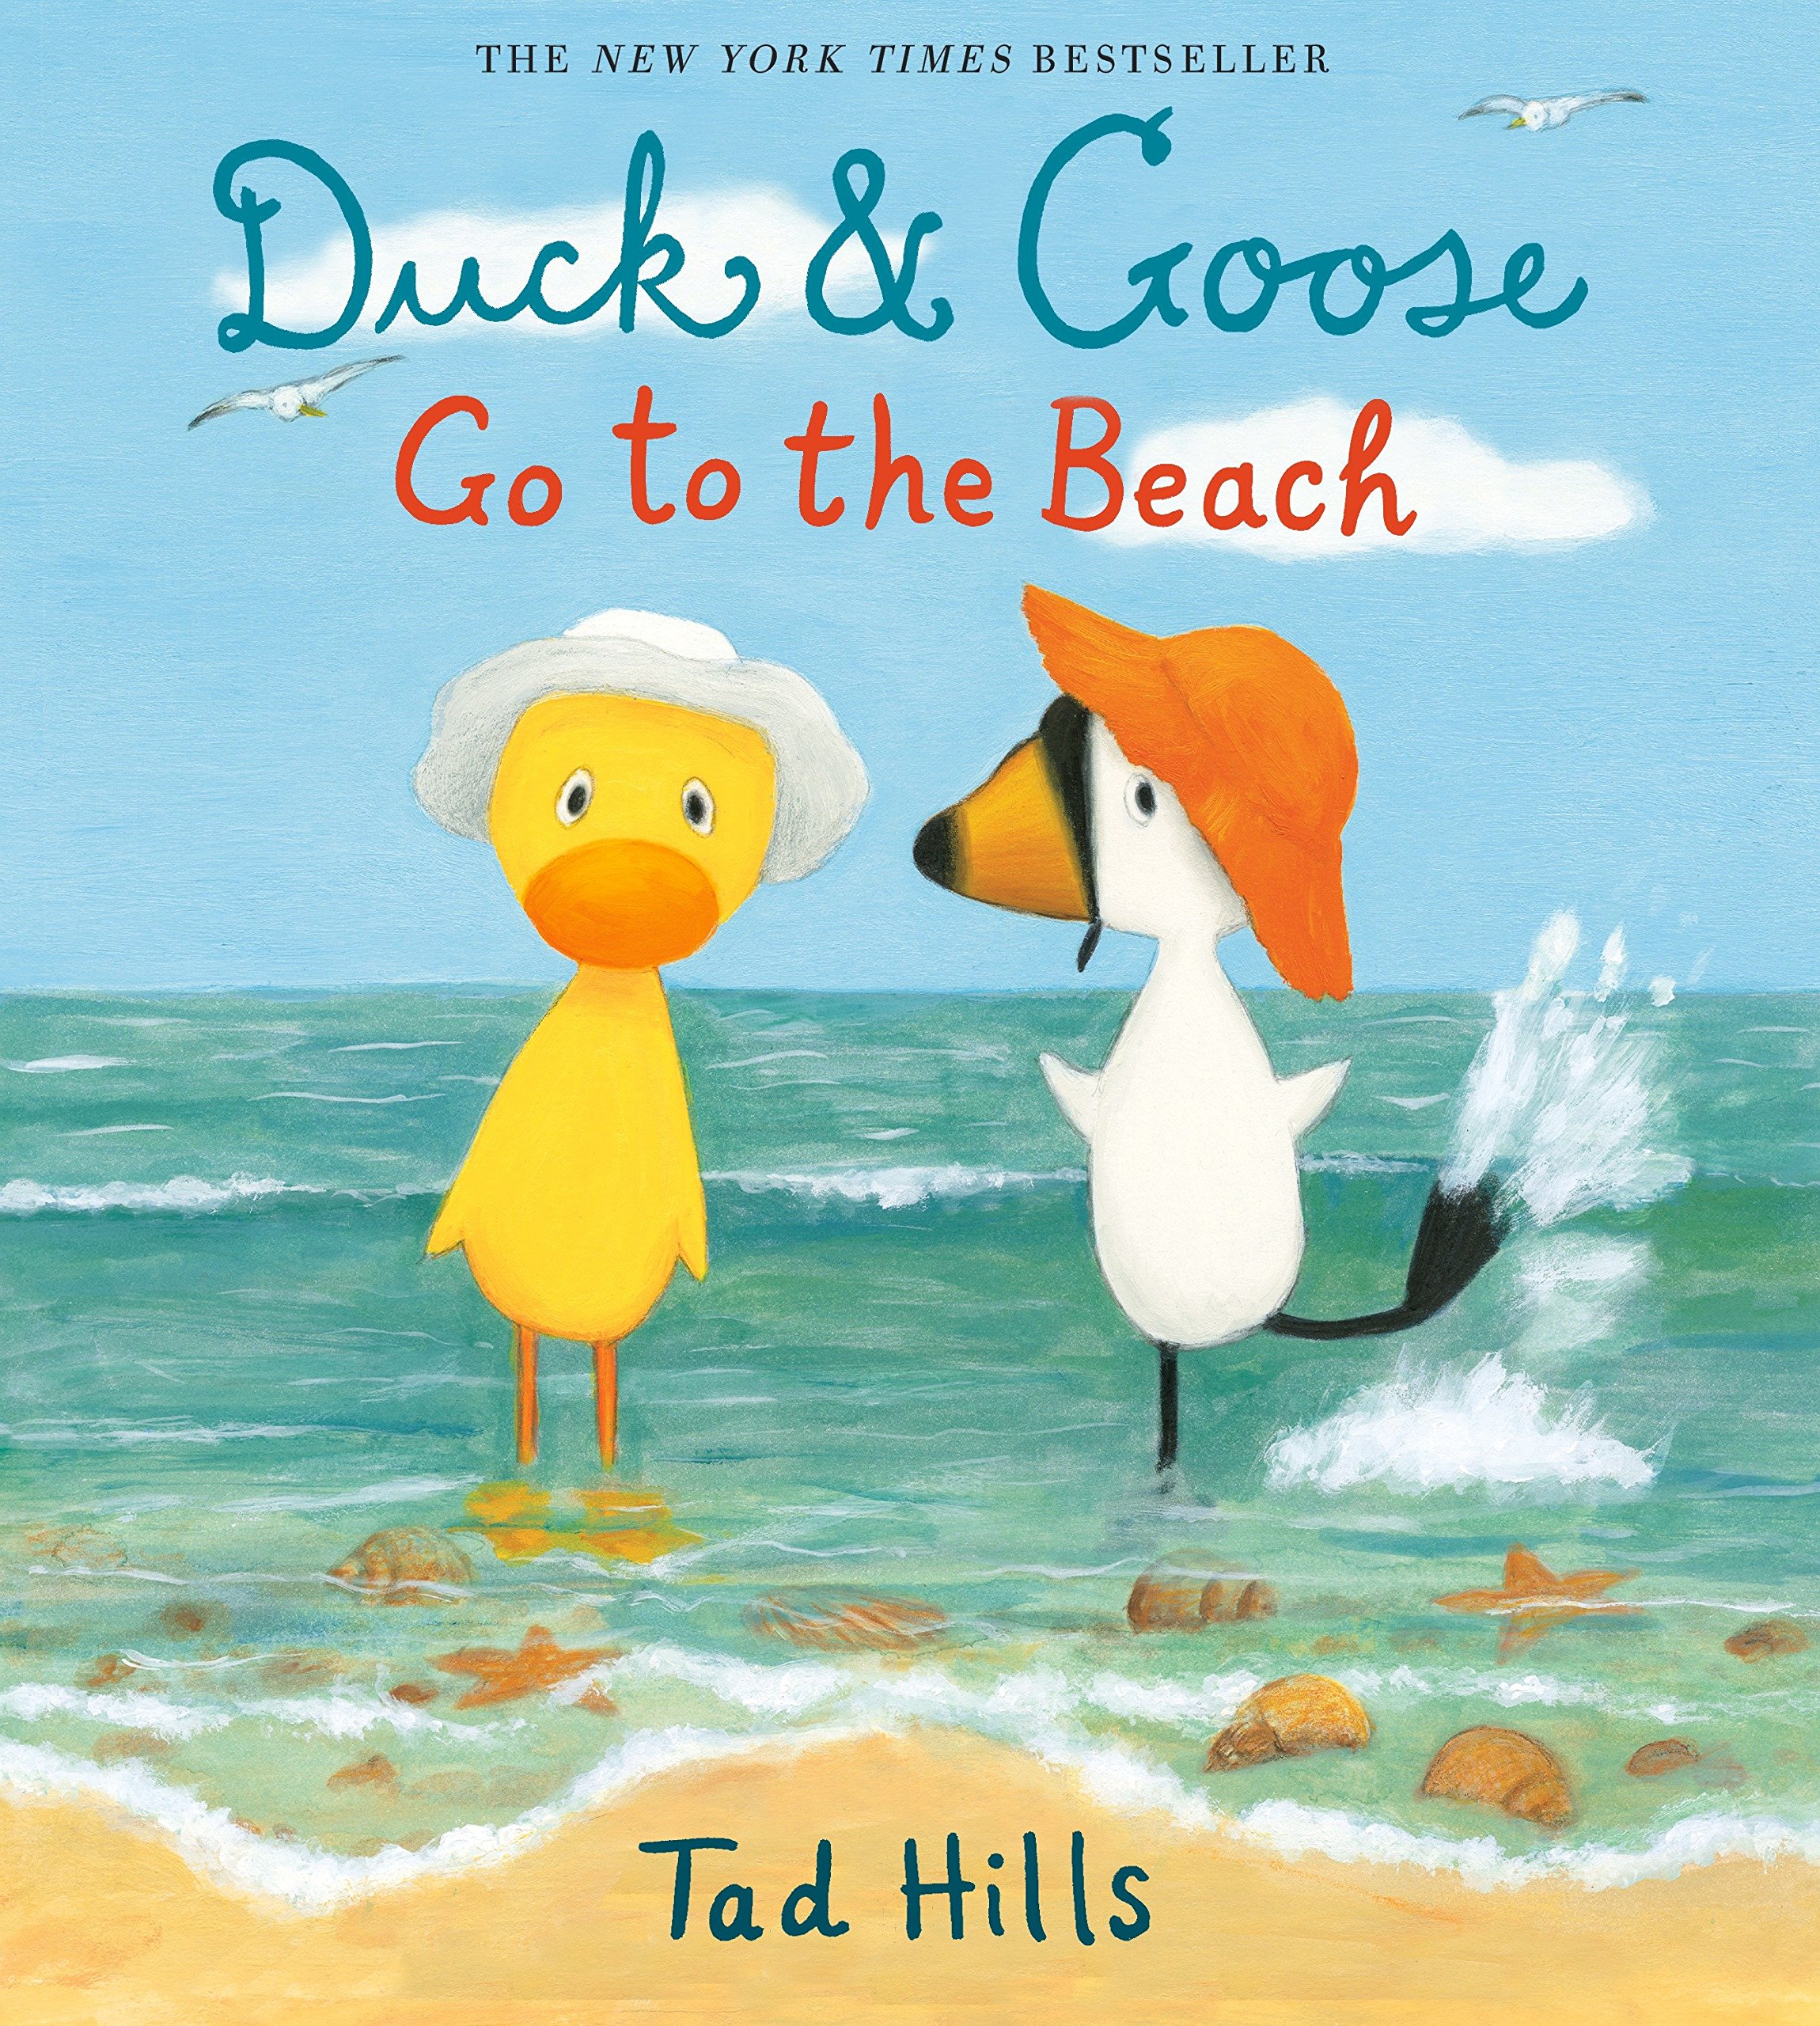 speech and language teaching concepts for Duck and Goose Go to the Beach in speech therapy